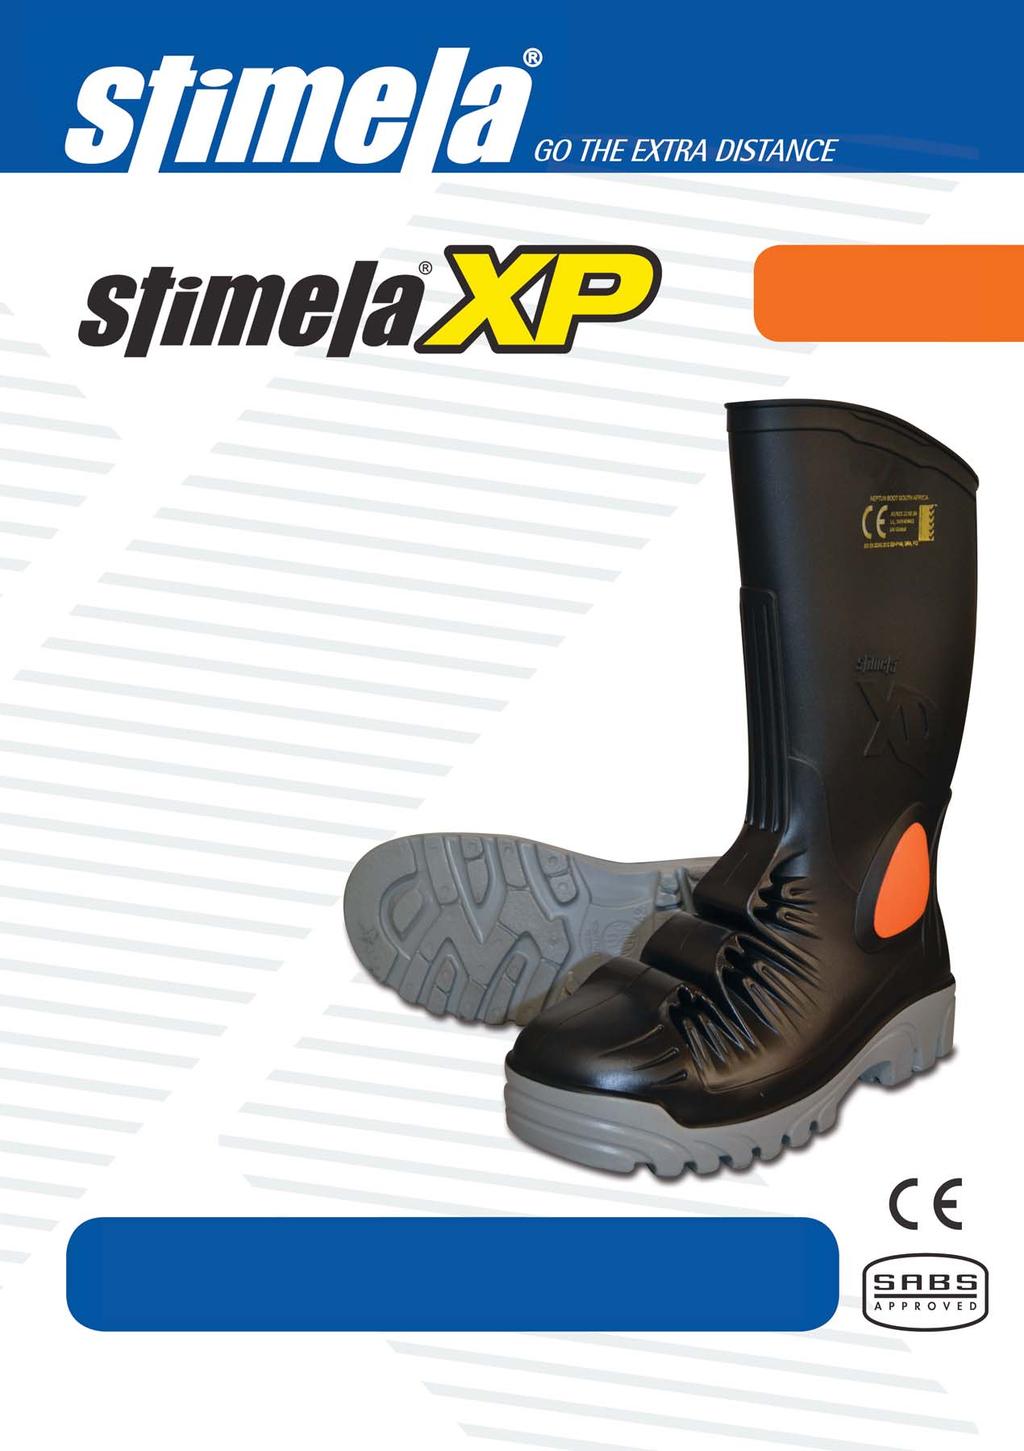 LIGHTWEIGHT Only weighs 2.4kg METAL FREE FULL PROTECTION GUMBOOTS FWG910 Full metal free heavy-duty knee length PVC gumboot with safety toe protection. Textile mid sole.